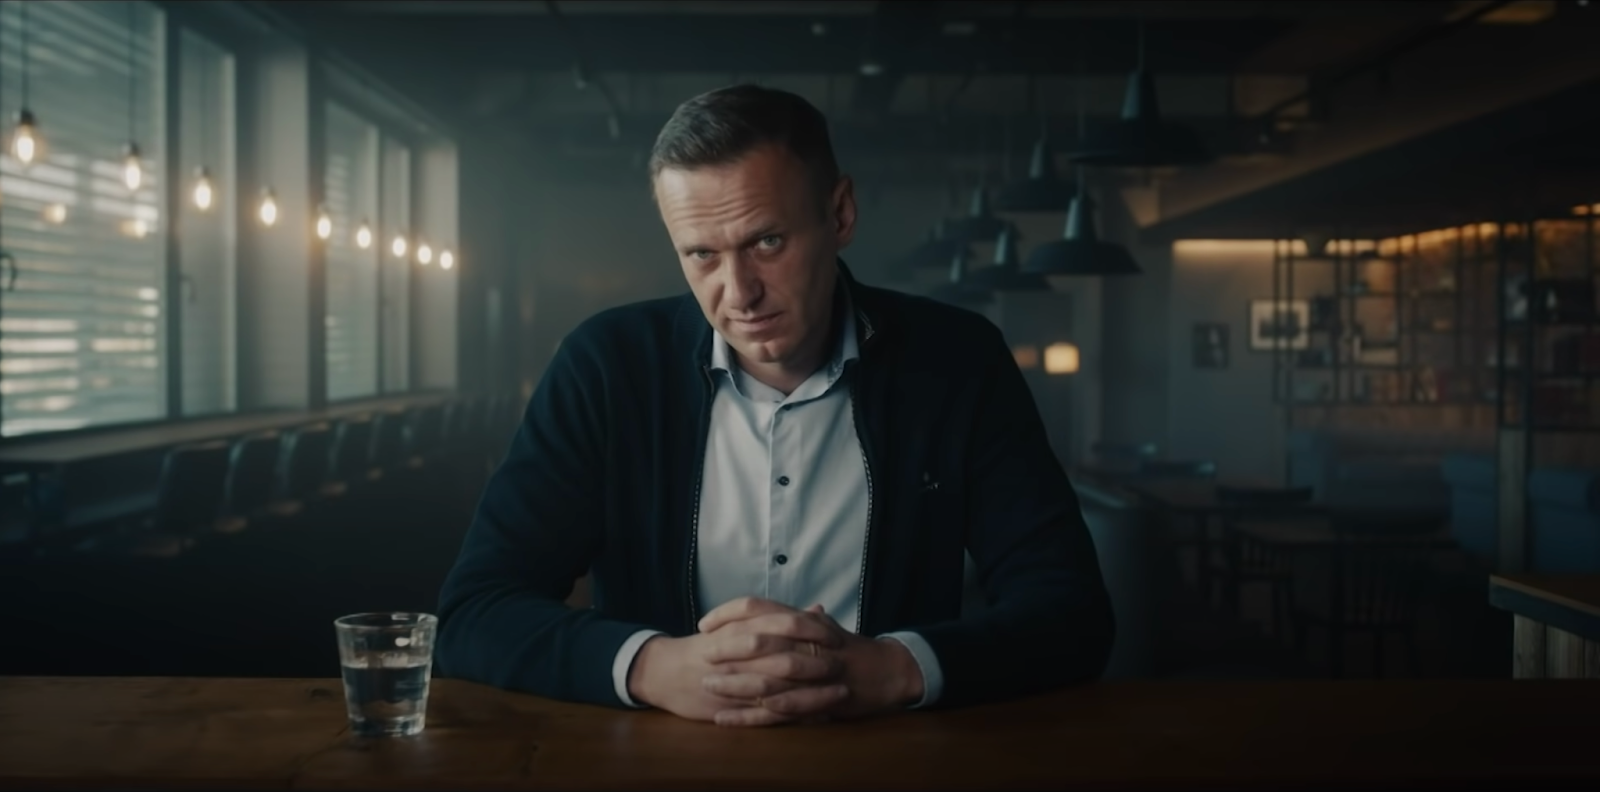 ‘Navalny’ movie review: Documentary depicts a hero, but who is Navalny to Ukraine?